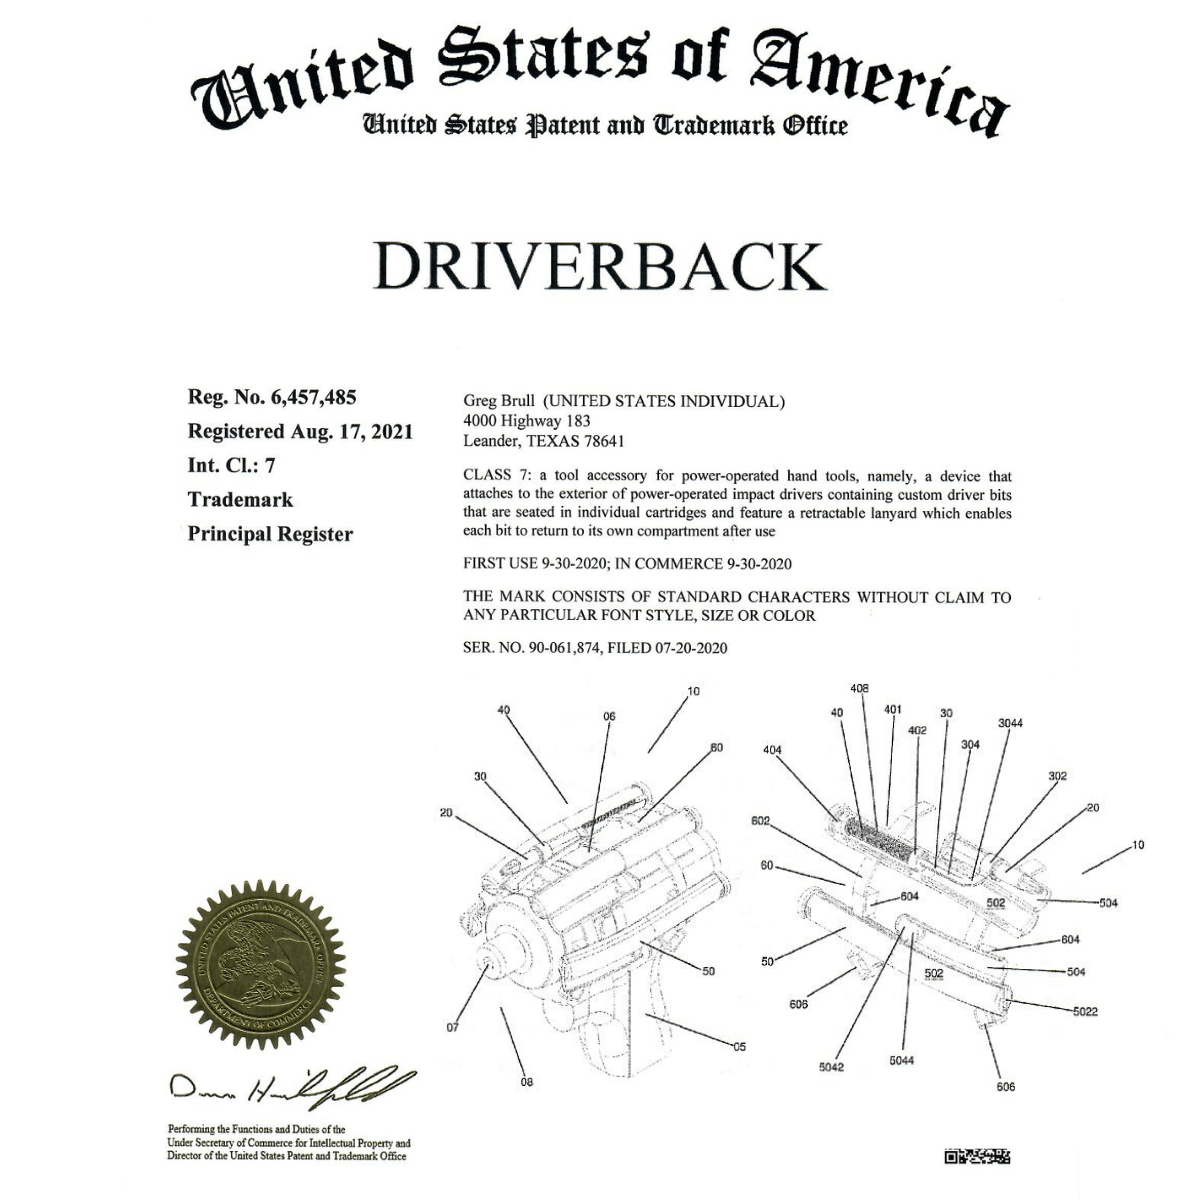 Patent image and Trademark for Driverback